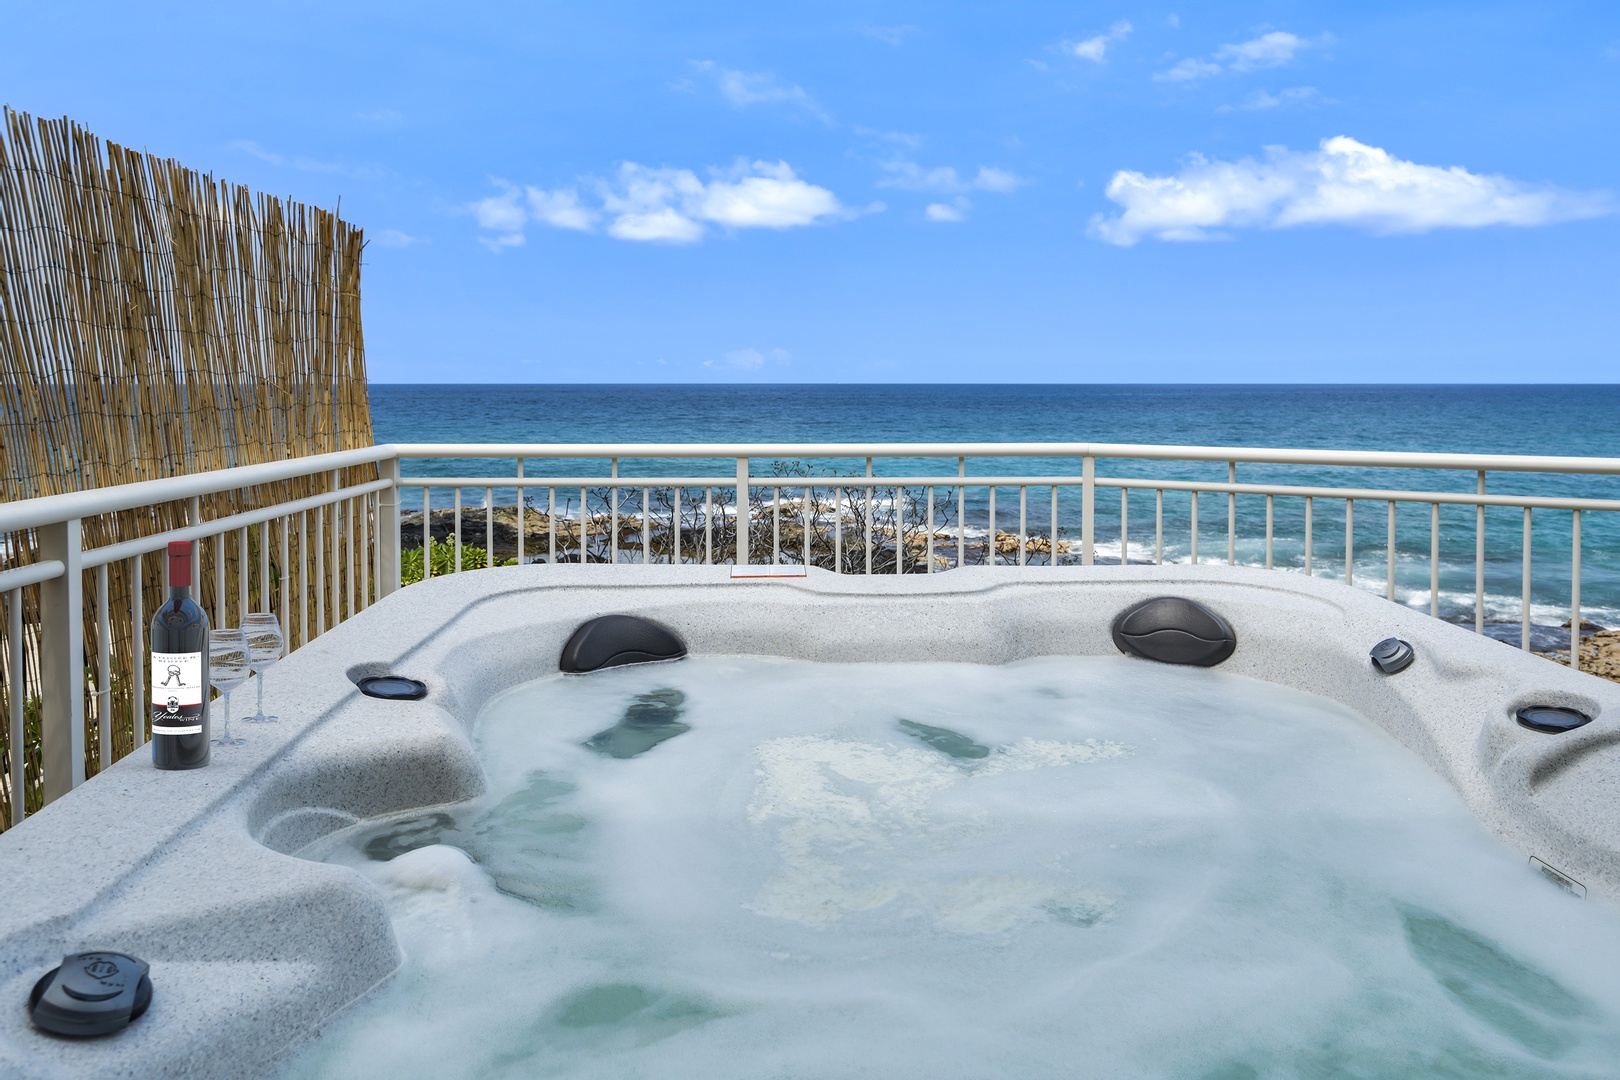 Kailua Kona Vacation Rentals, Ali'i Point #12 - Relax in the luxurious newly added hot tub!